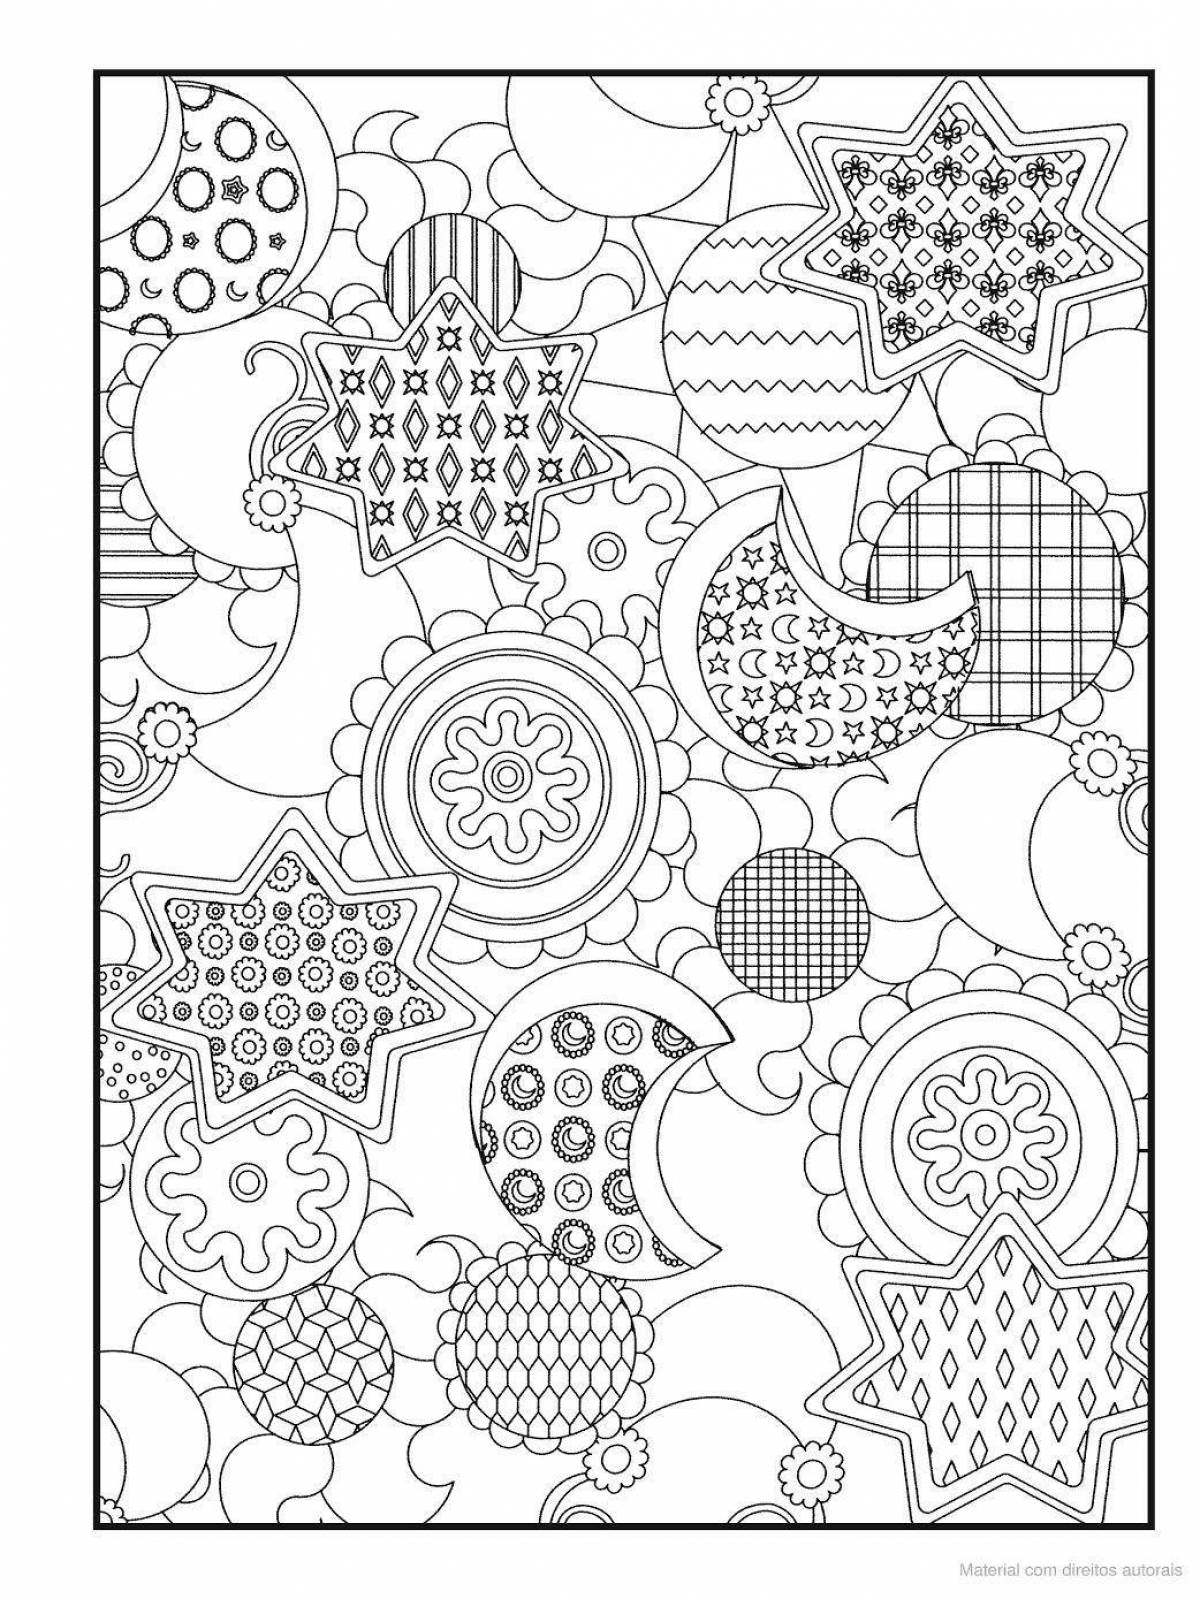 Inspirational coloring book for kids